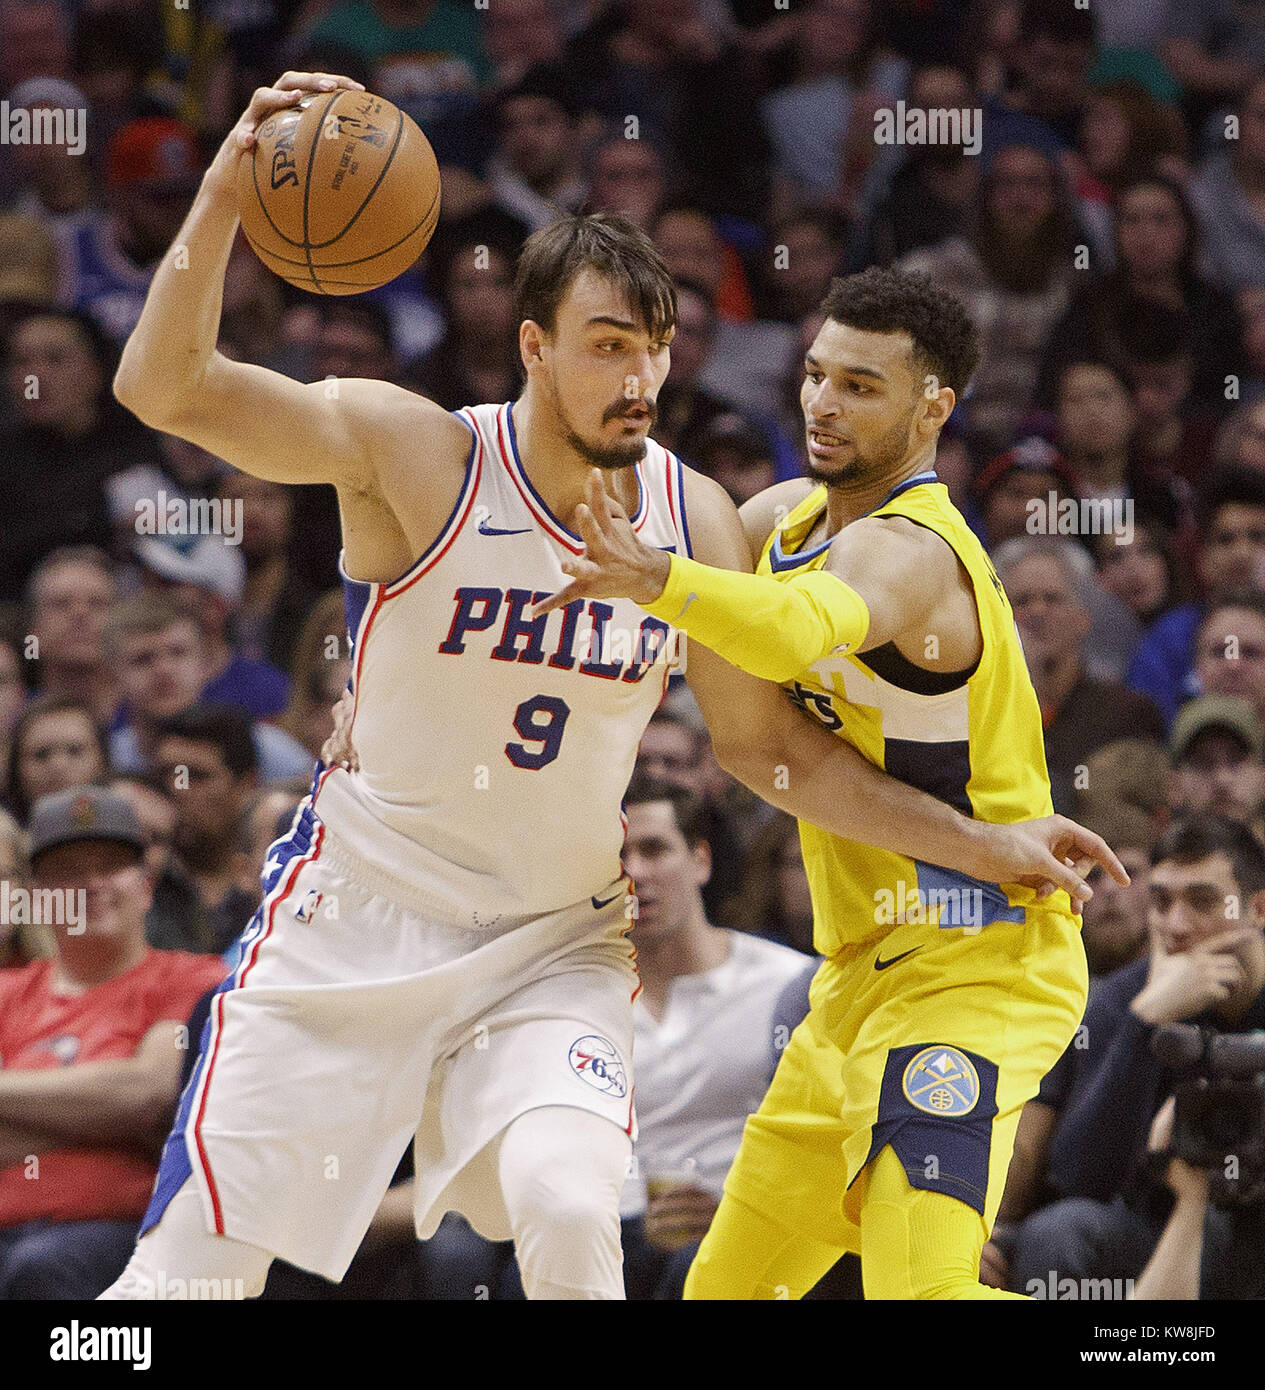 Denver, Colorado, USA. 30th Dec, 2017. 76ers DARIO SARIC, left, runs into Nuggets JAMAL MURRAY, right, during the 1st. Half at the Pepsi Center Saturday night. The 76ers beat the Nuggets 107-102. Credit: Hector Acevedo/ZUMA Wire/Alamy Live News Stock Photo